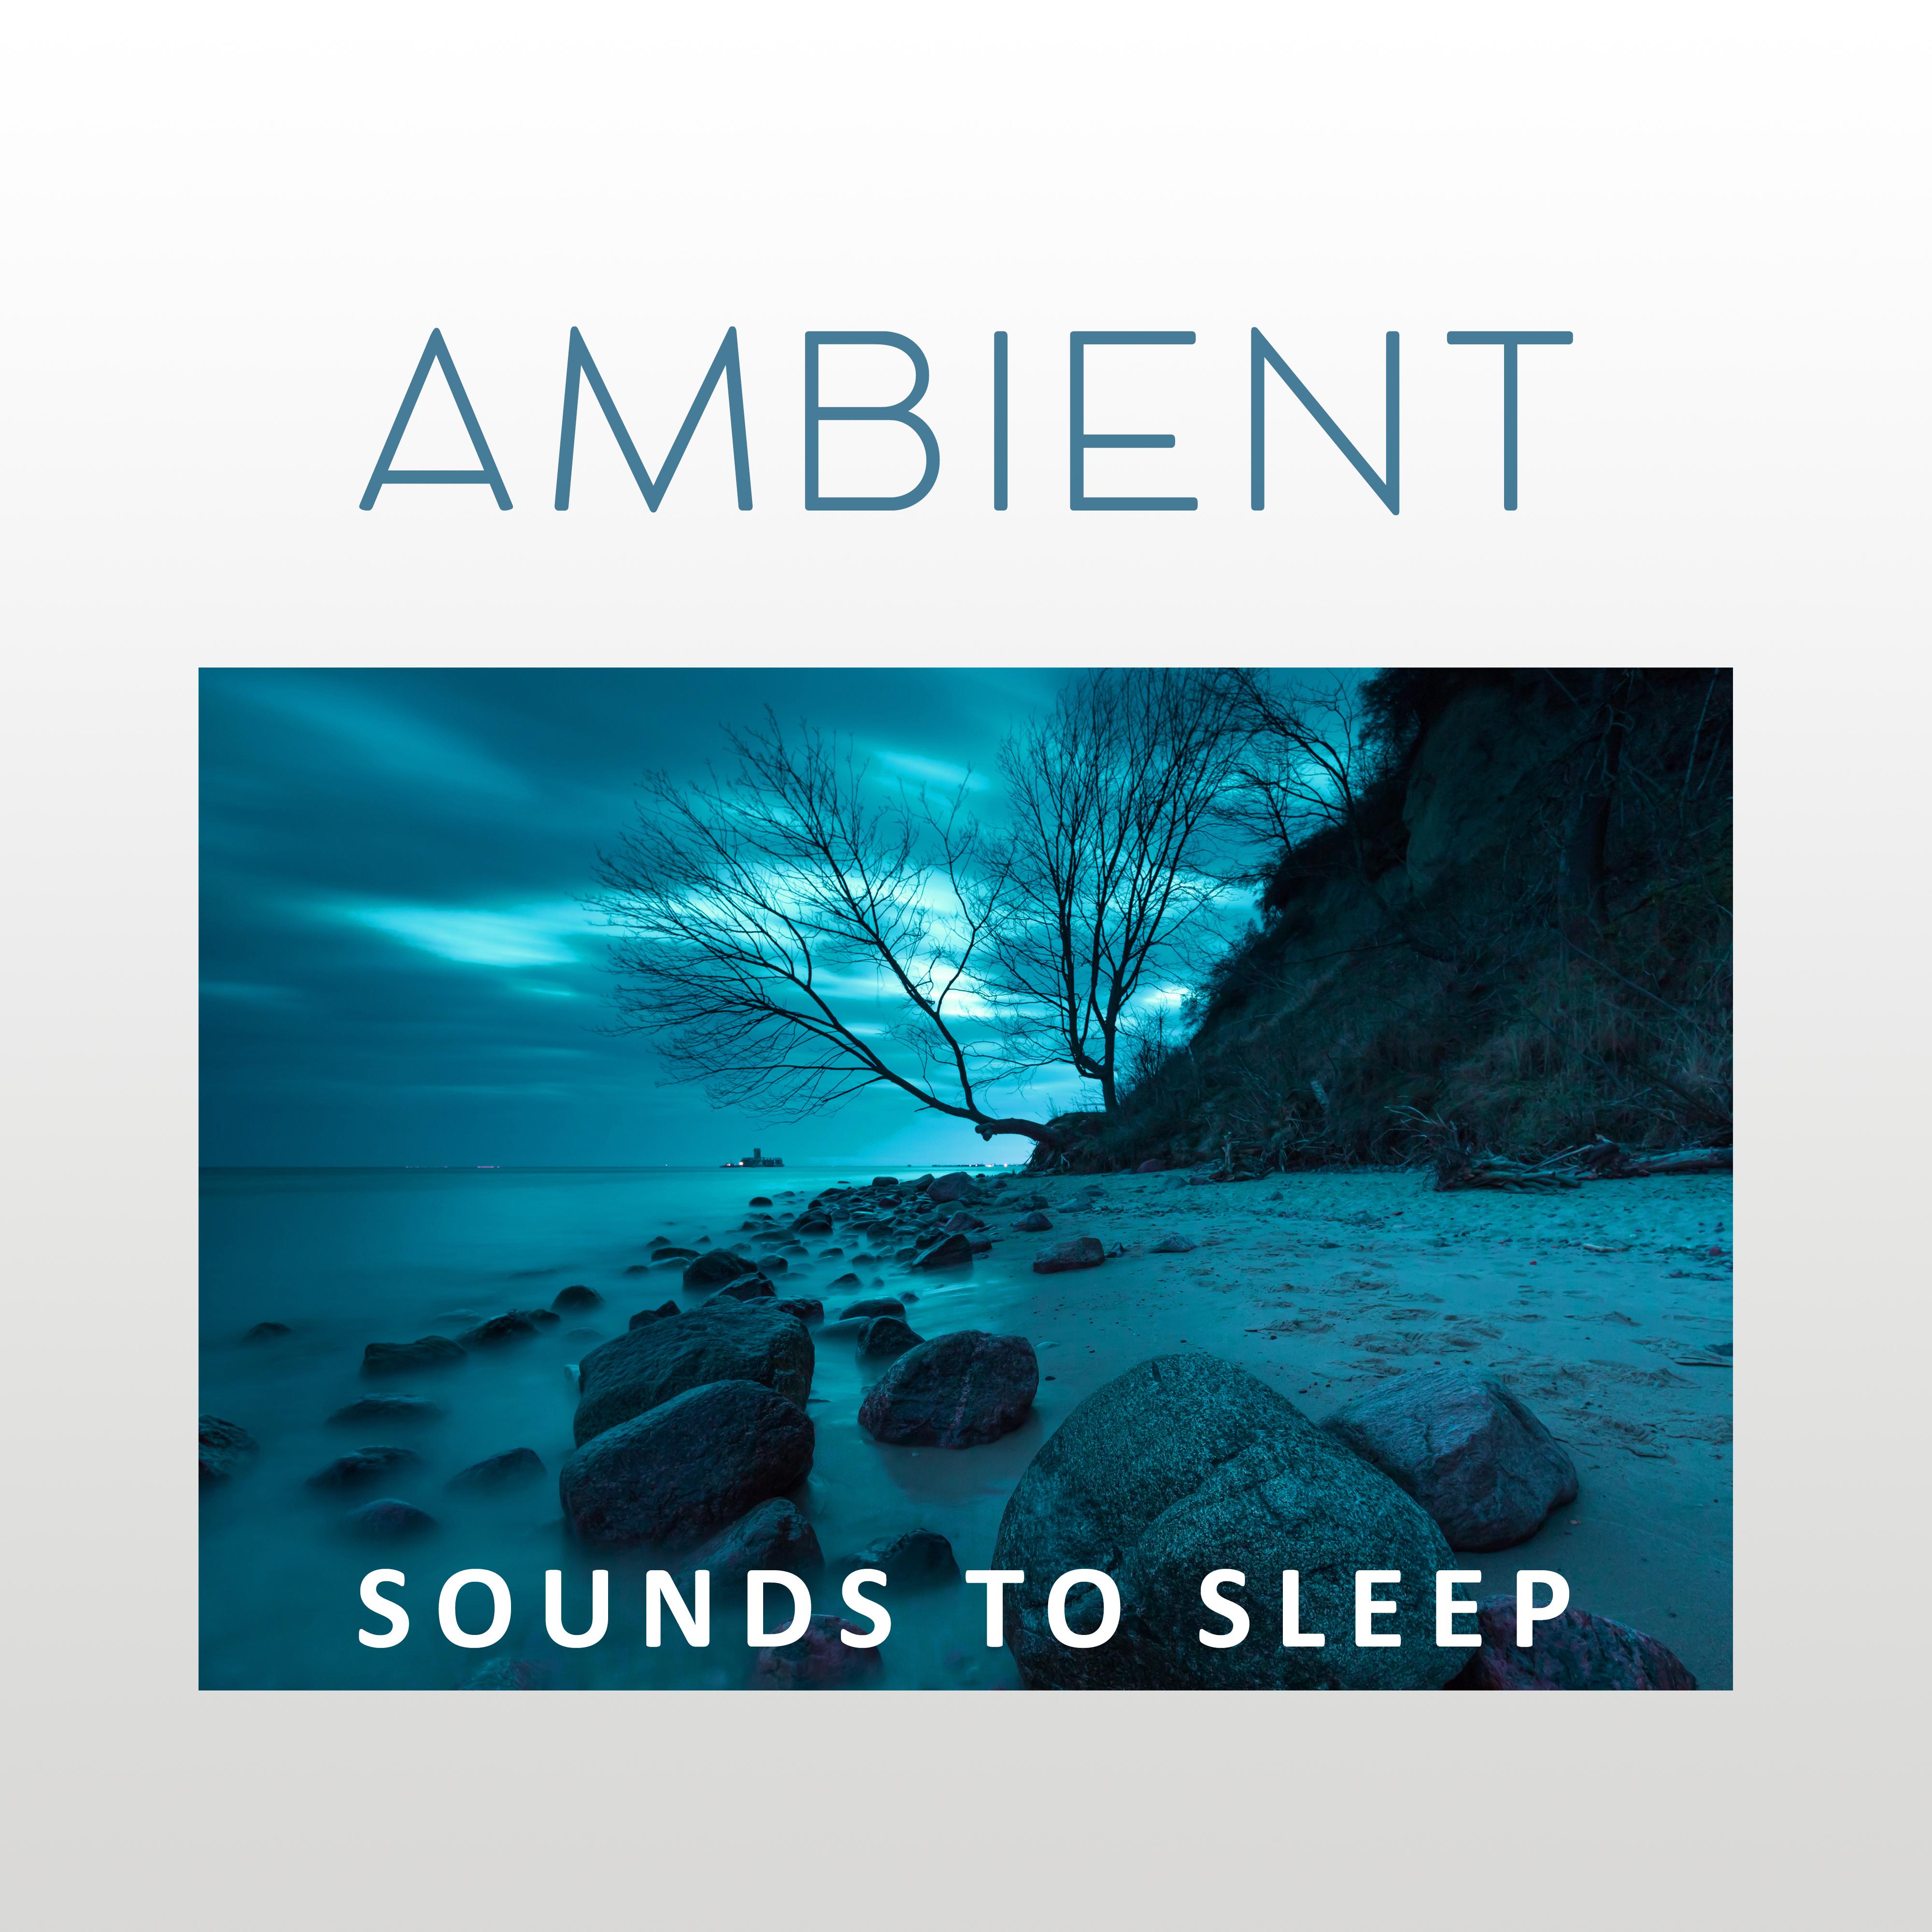 Ambient Sounds to Sleep  Stress Relief, Sleep Sounds, Sweet Dreams, Peaceful Melodies for Dreaming